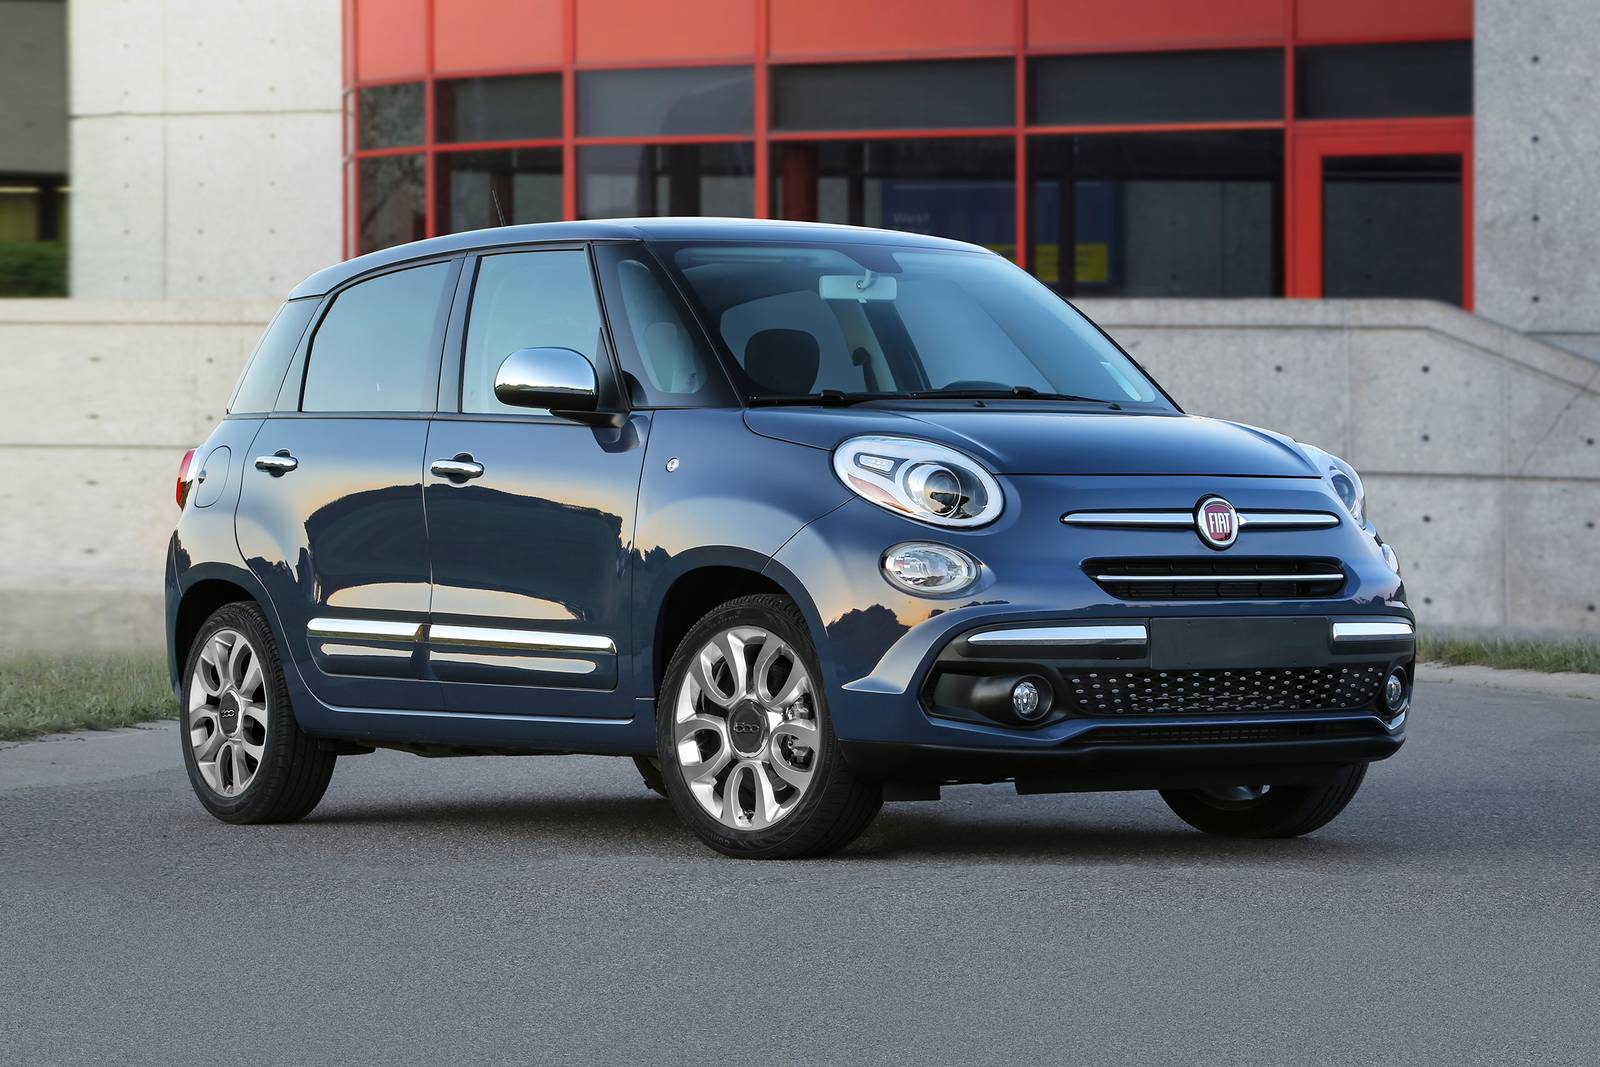 15-The Most Reliable Cars Revealed-Fiat 500L